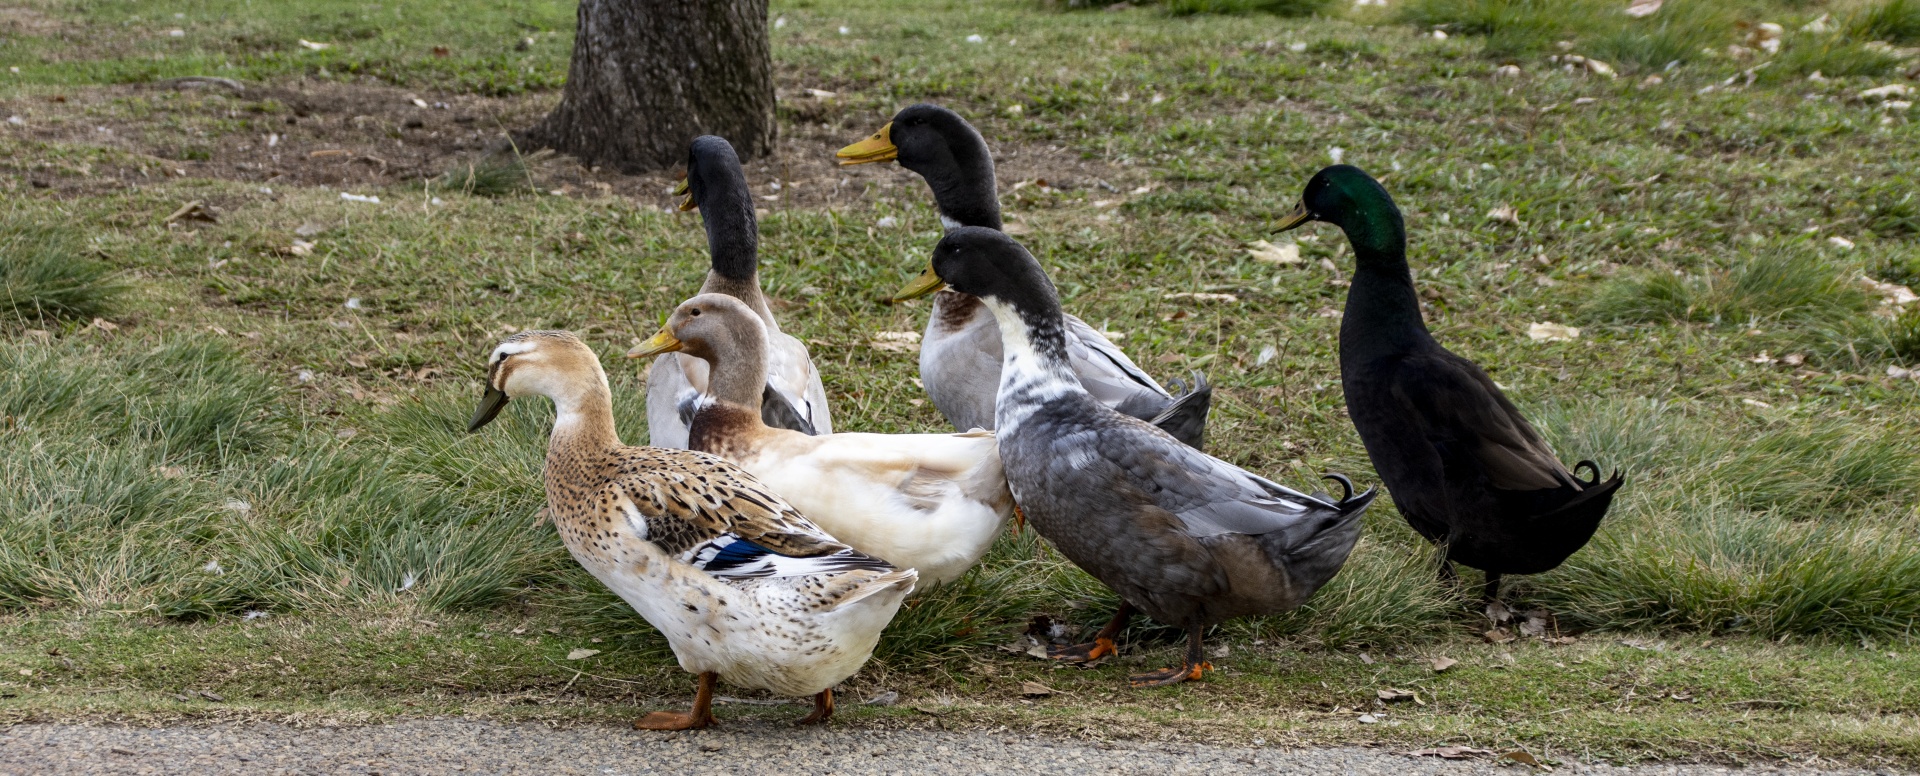 a team of different colored ducks walking